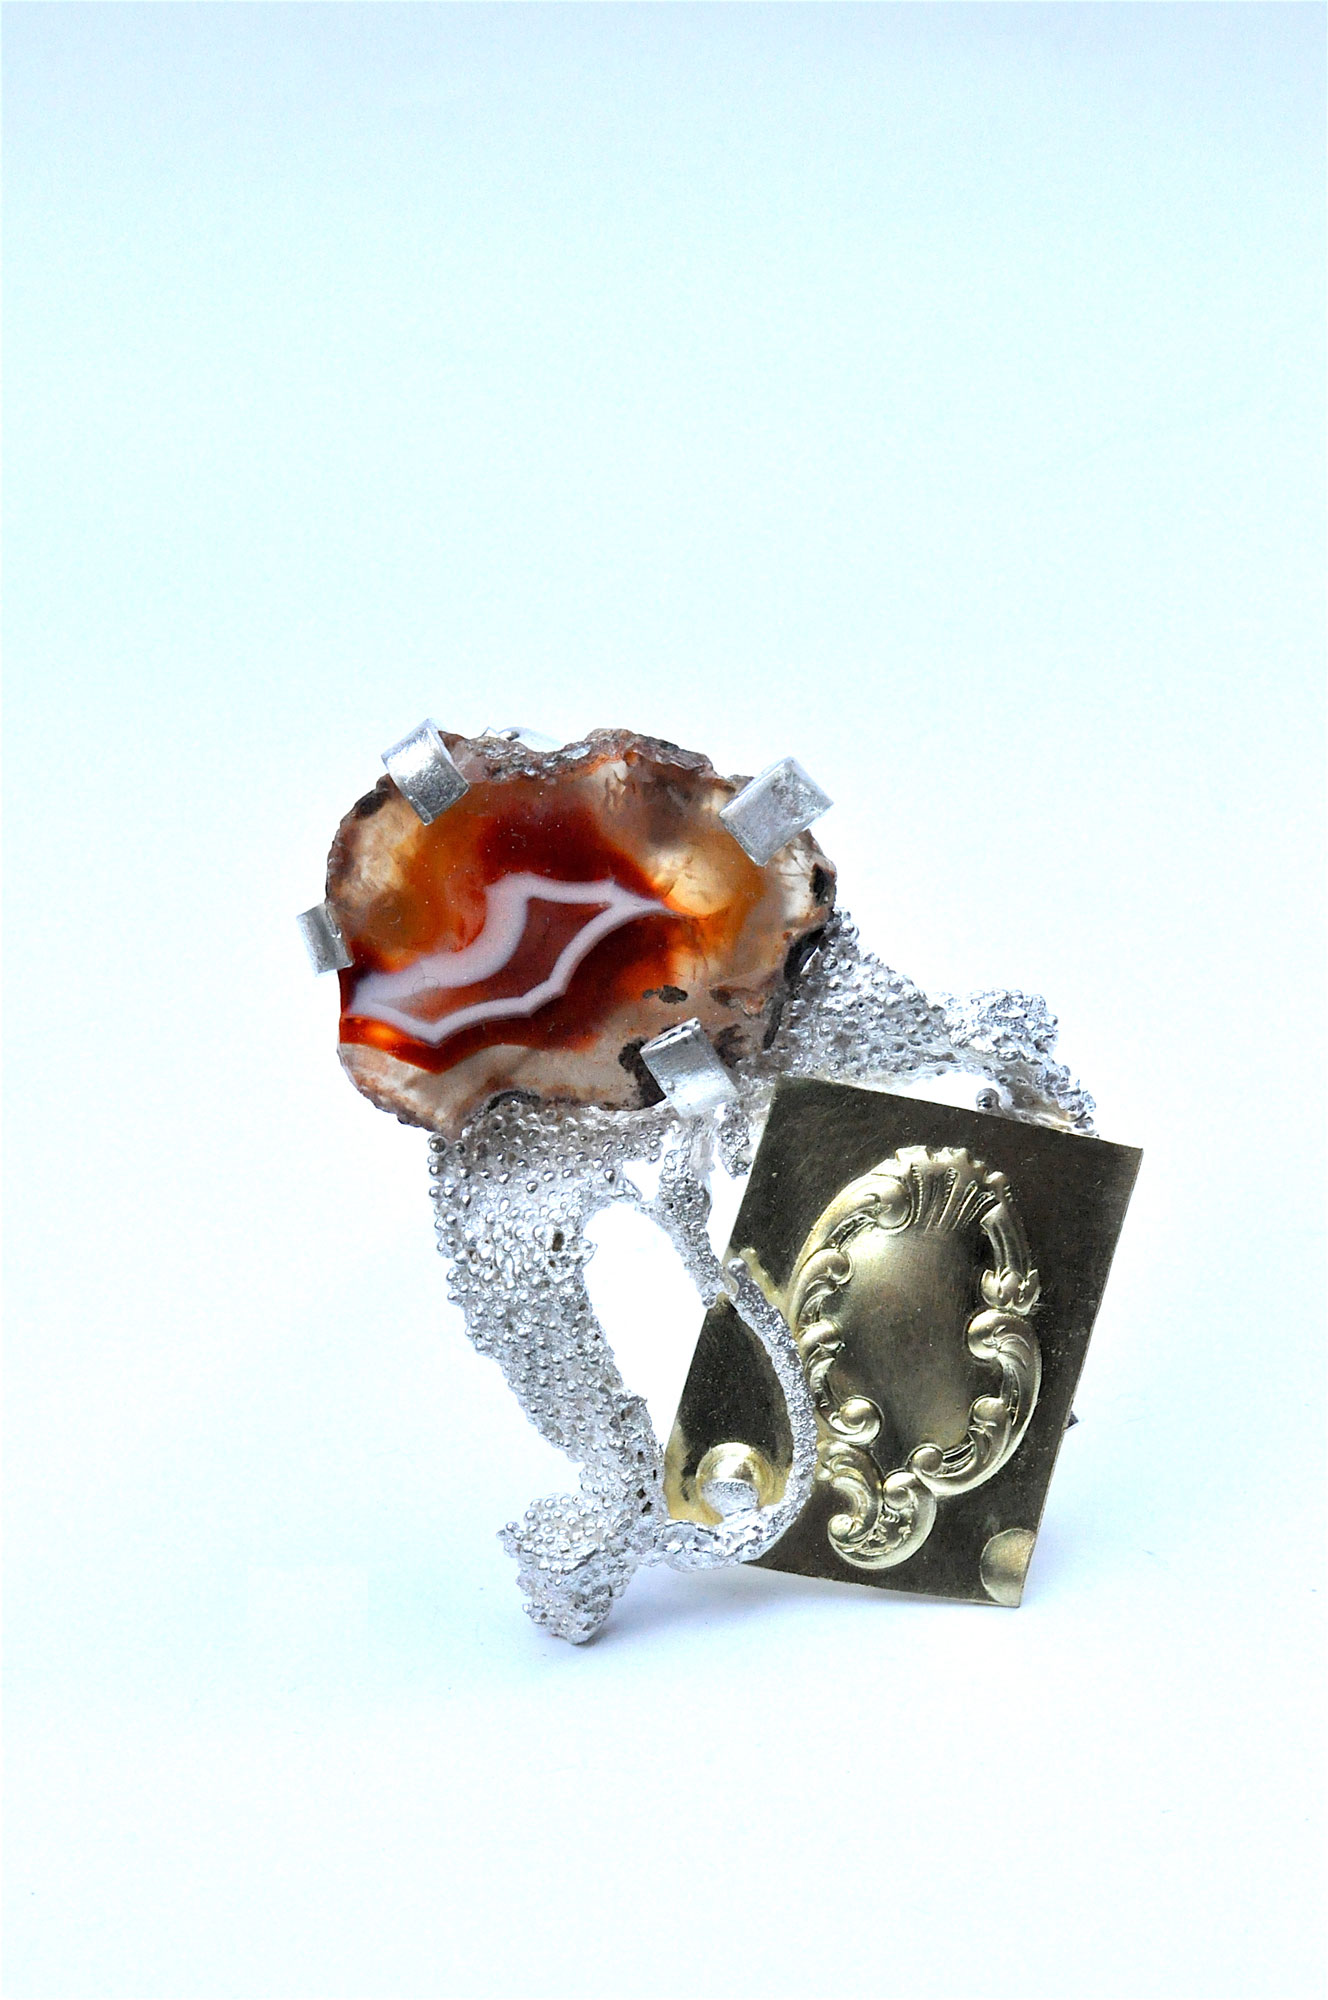 Back from Bengel N°4 - Or, argent, agate cornaline - 6,5 x 4,2 x 2 cm - 2006